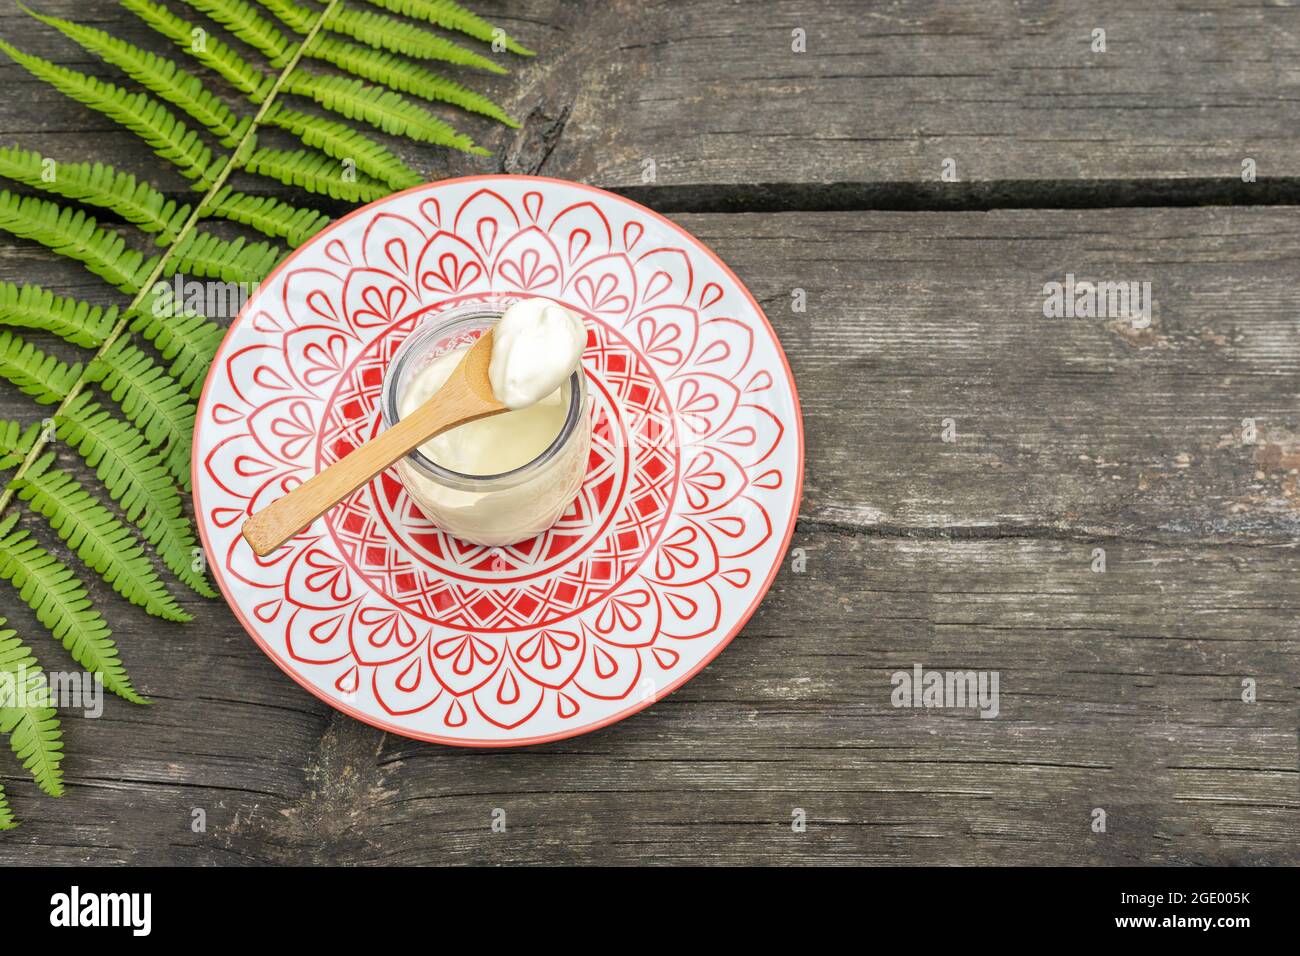 Eco friendly, food, composition with organic, vegan, homemade yogurt fern leave on a wooden table with place for text. Dairy-free yogurt. Mindful and Stock Photo